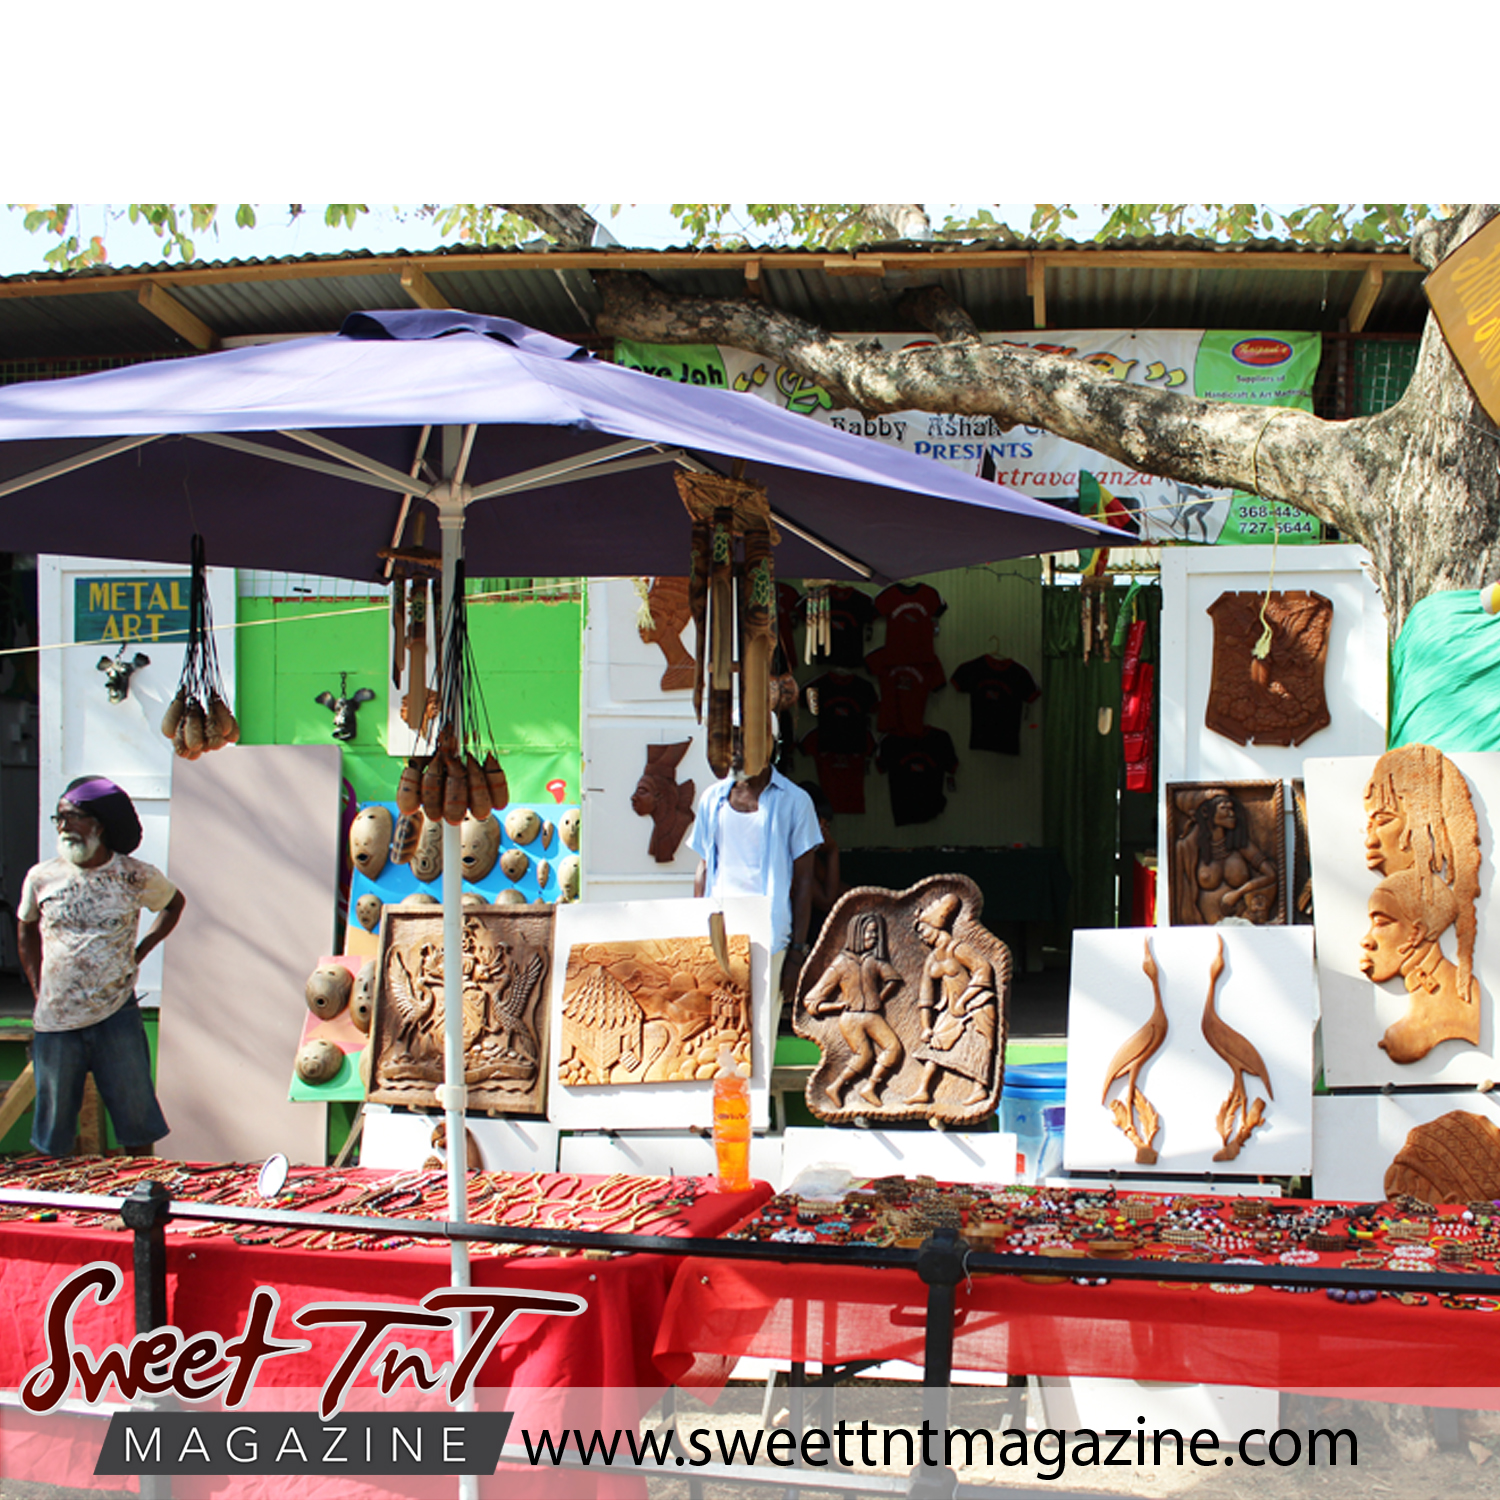 Art at Queen's Park Savannah in sweet T&T for Sweet TnT Magazine in Trinidad and Tobago